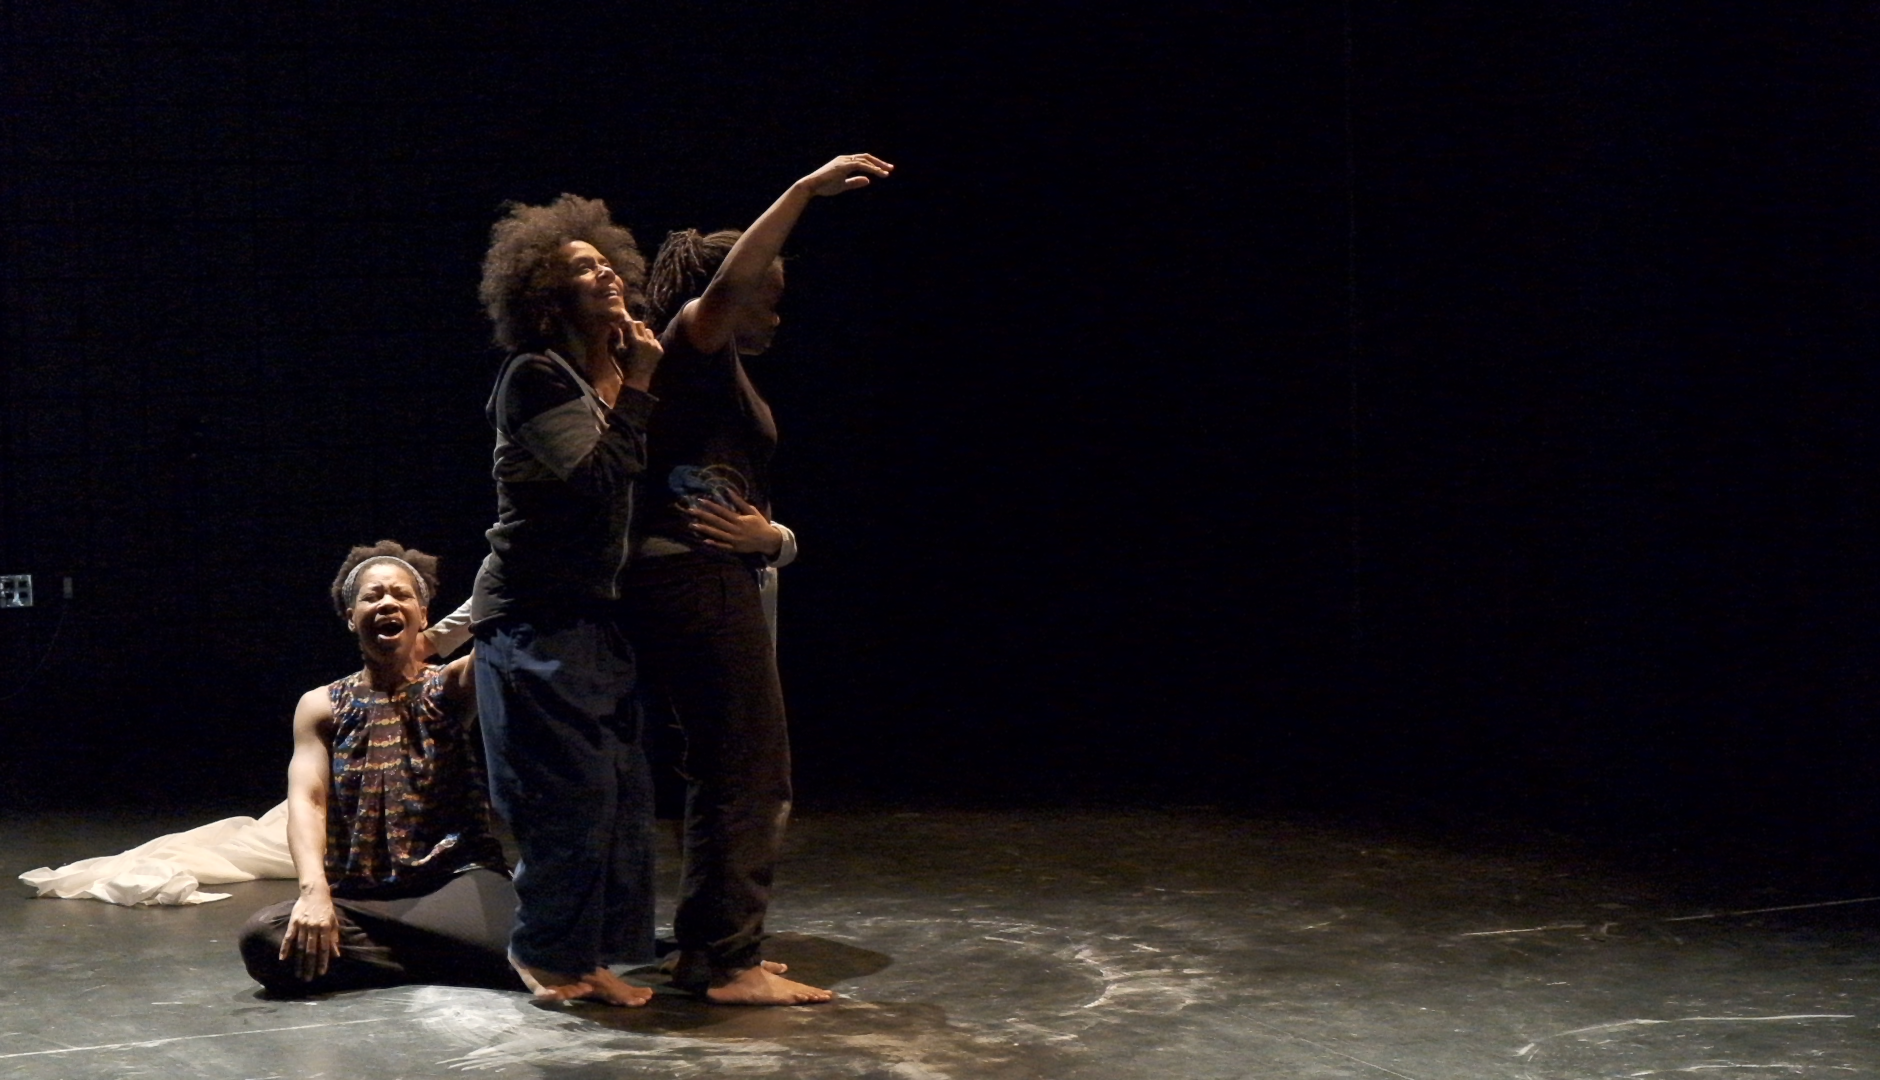 Four people with dark skin are lit on dark stage. One is sitting with mouth open, one is reaching, one is looking up, and another is embracing the others.